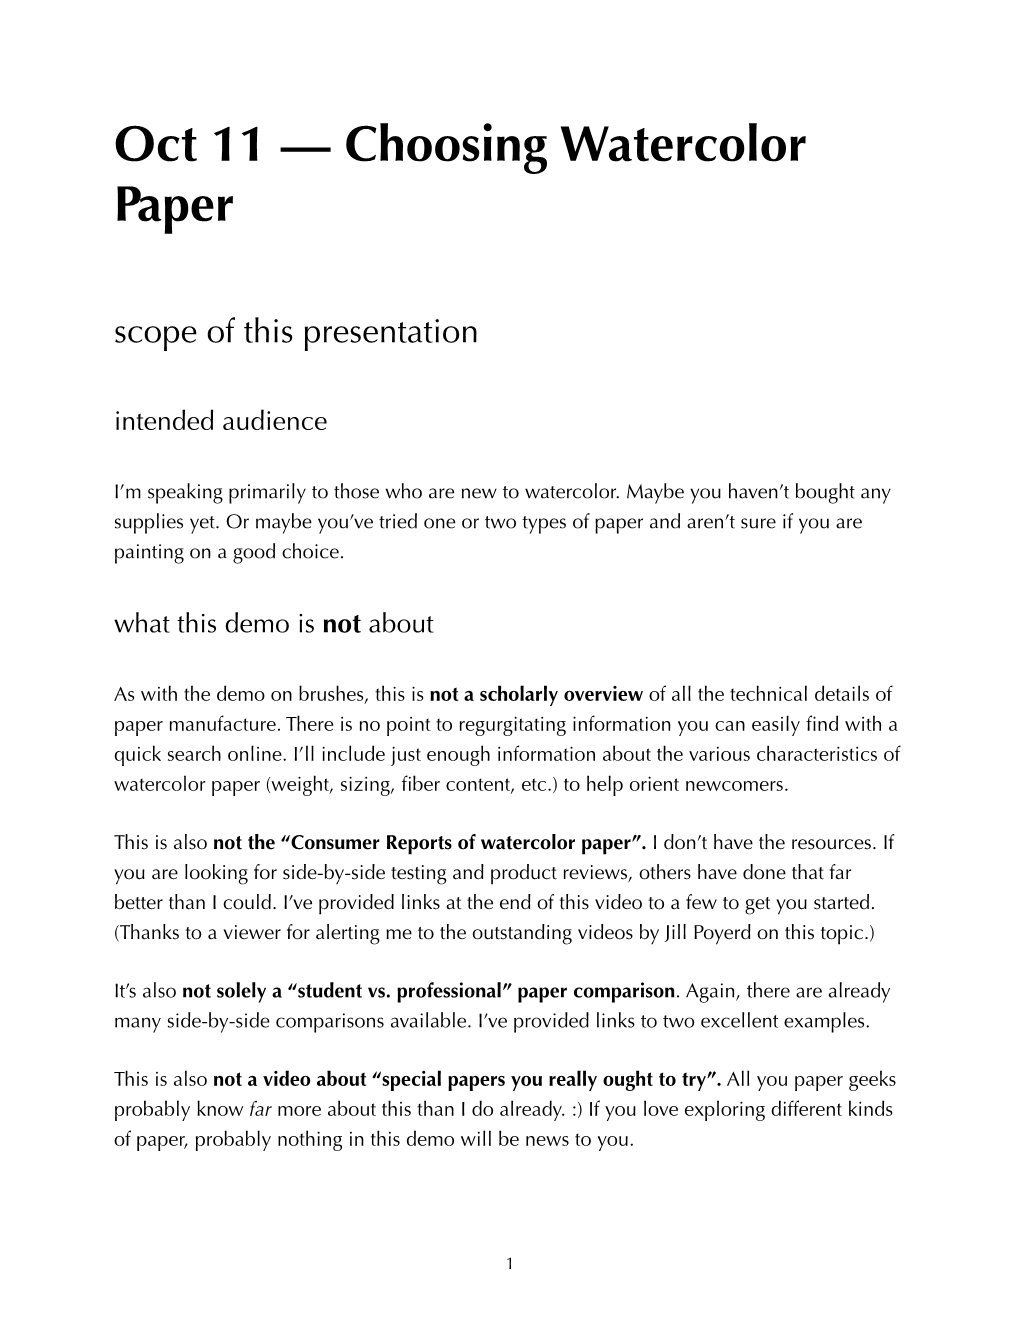 Oct 11 — Choosing Watercolor Paper Scope of This Presentation Intended Audience